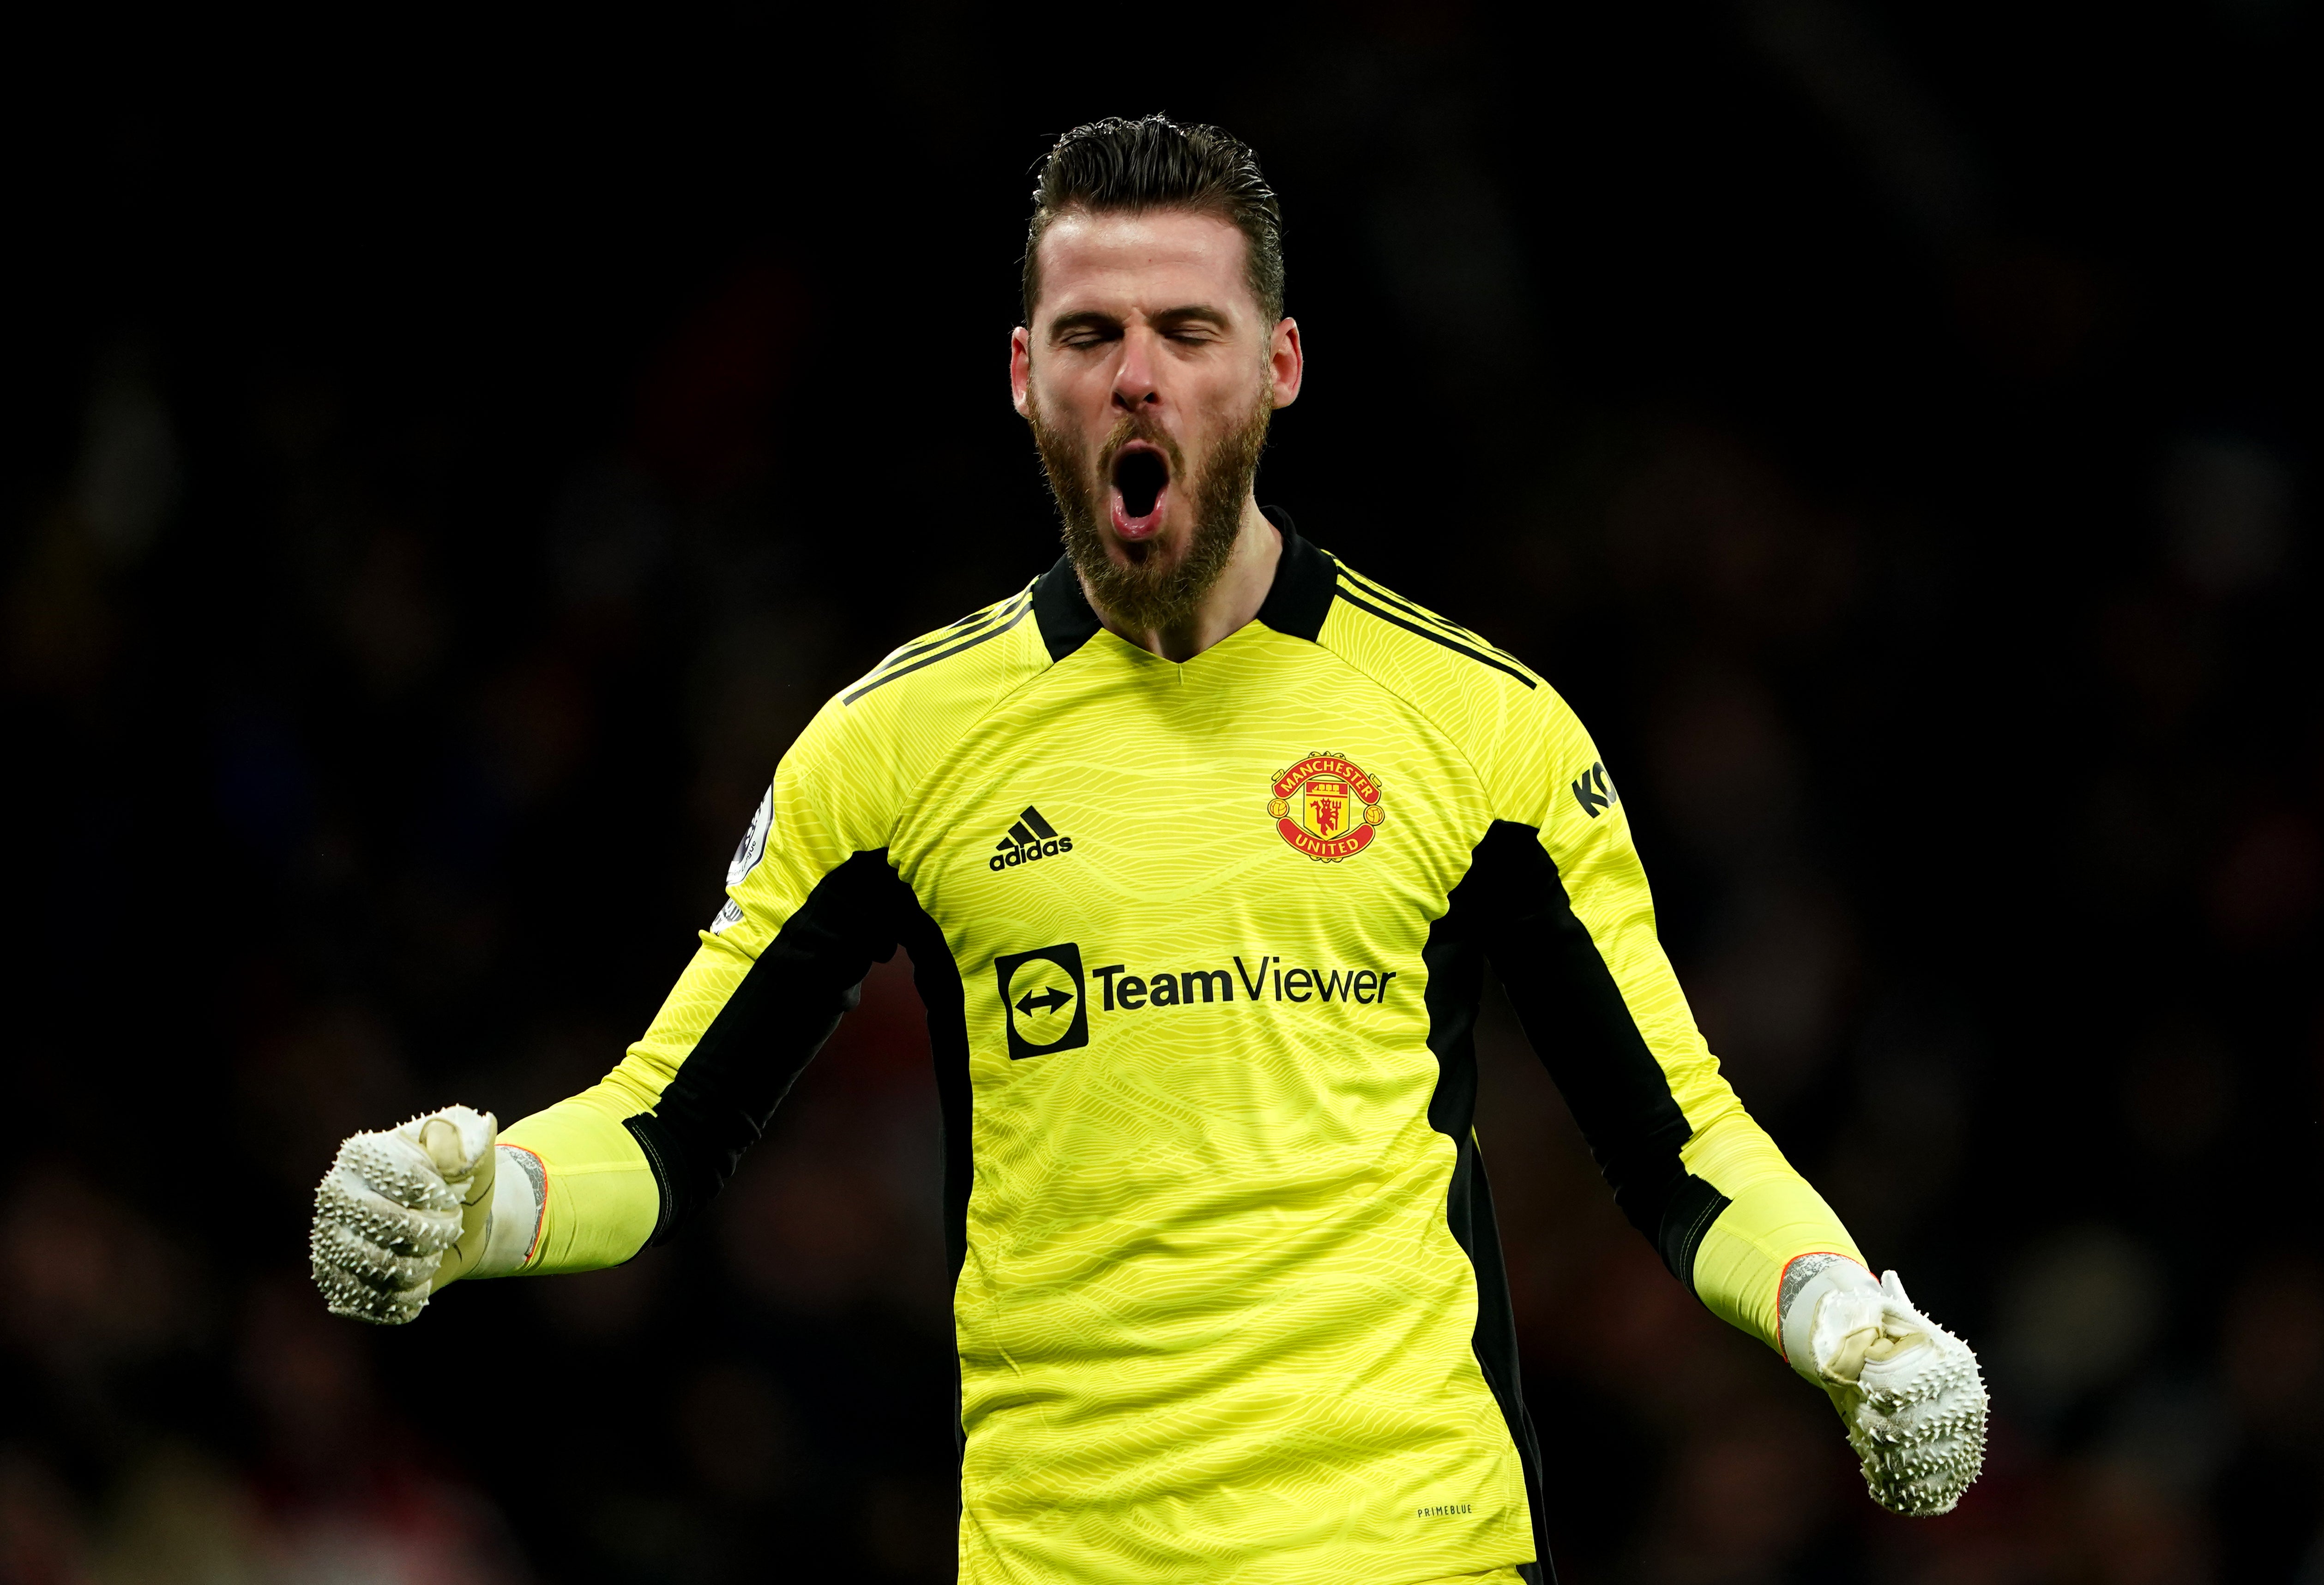 Manchester United goalkeeper David De Gea is open to extending his stay at Old Trafford